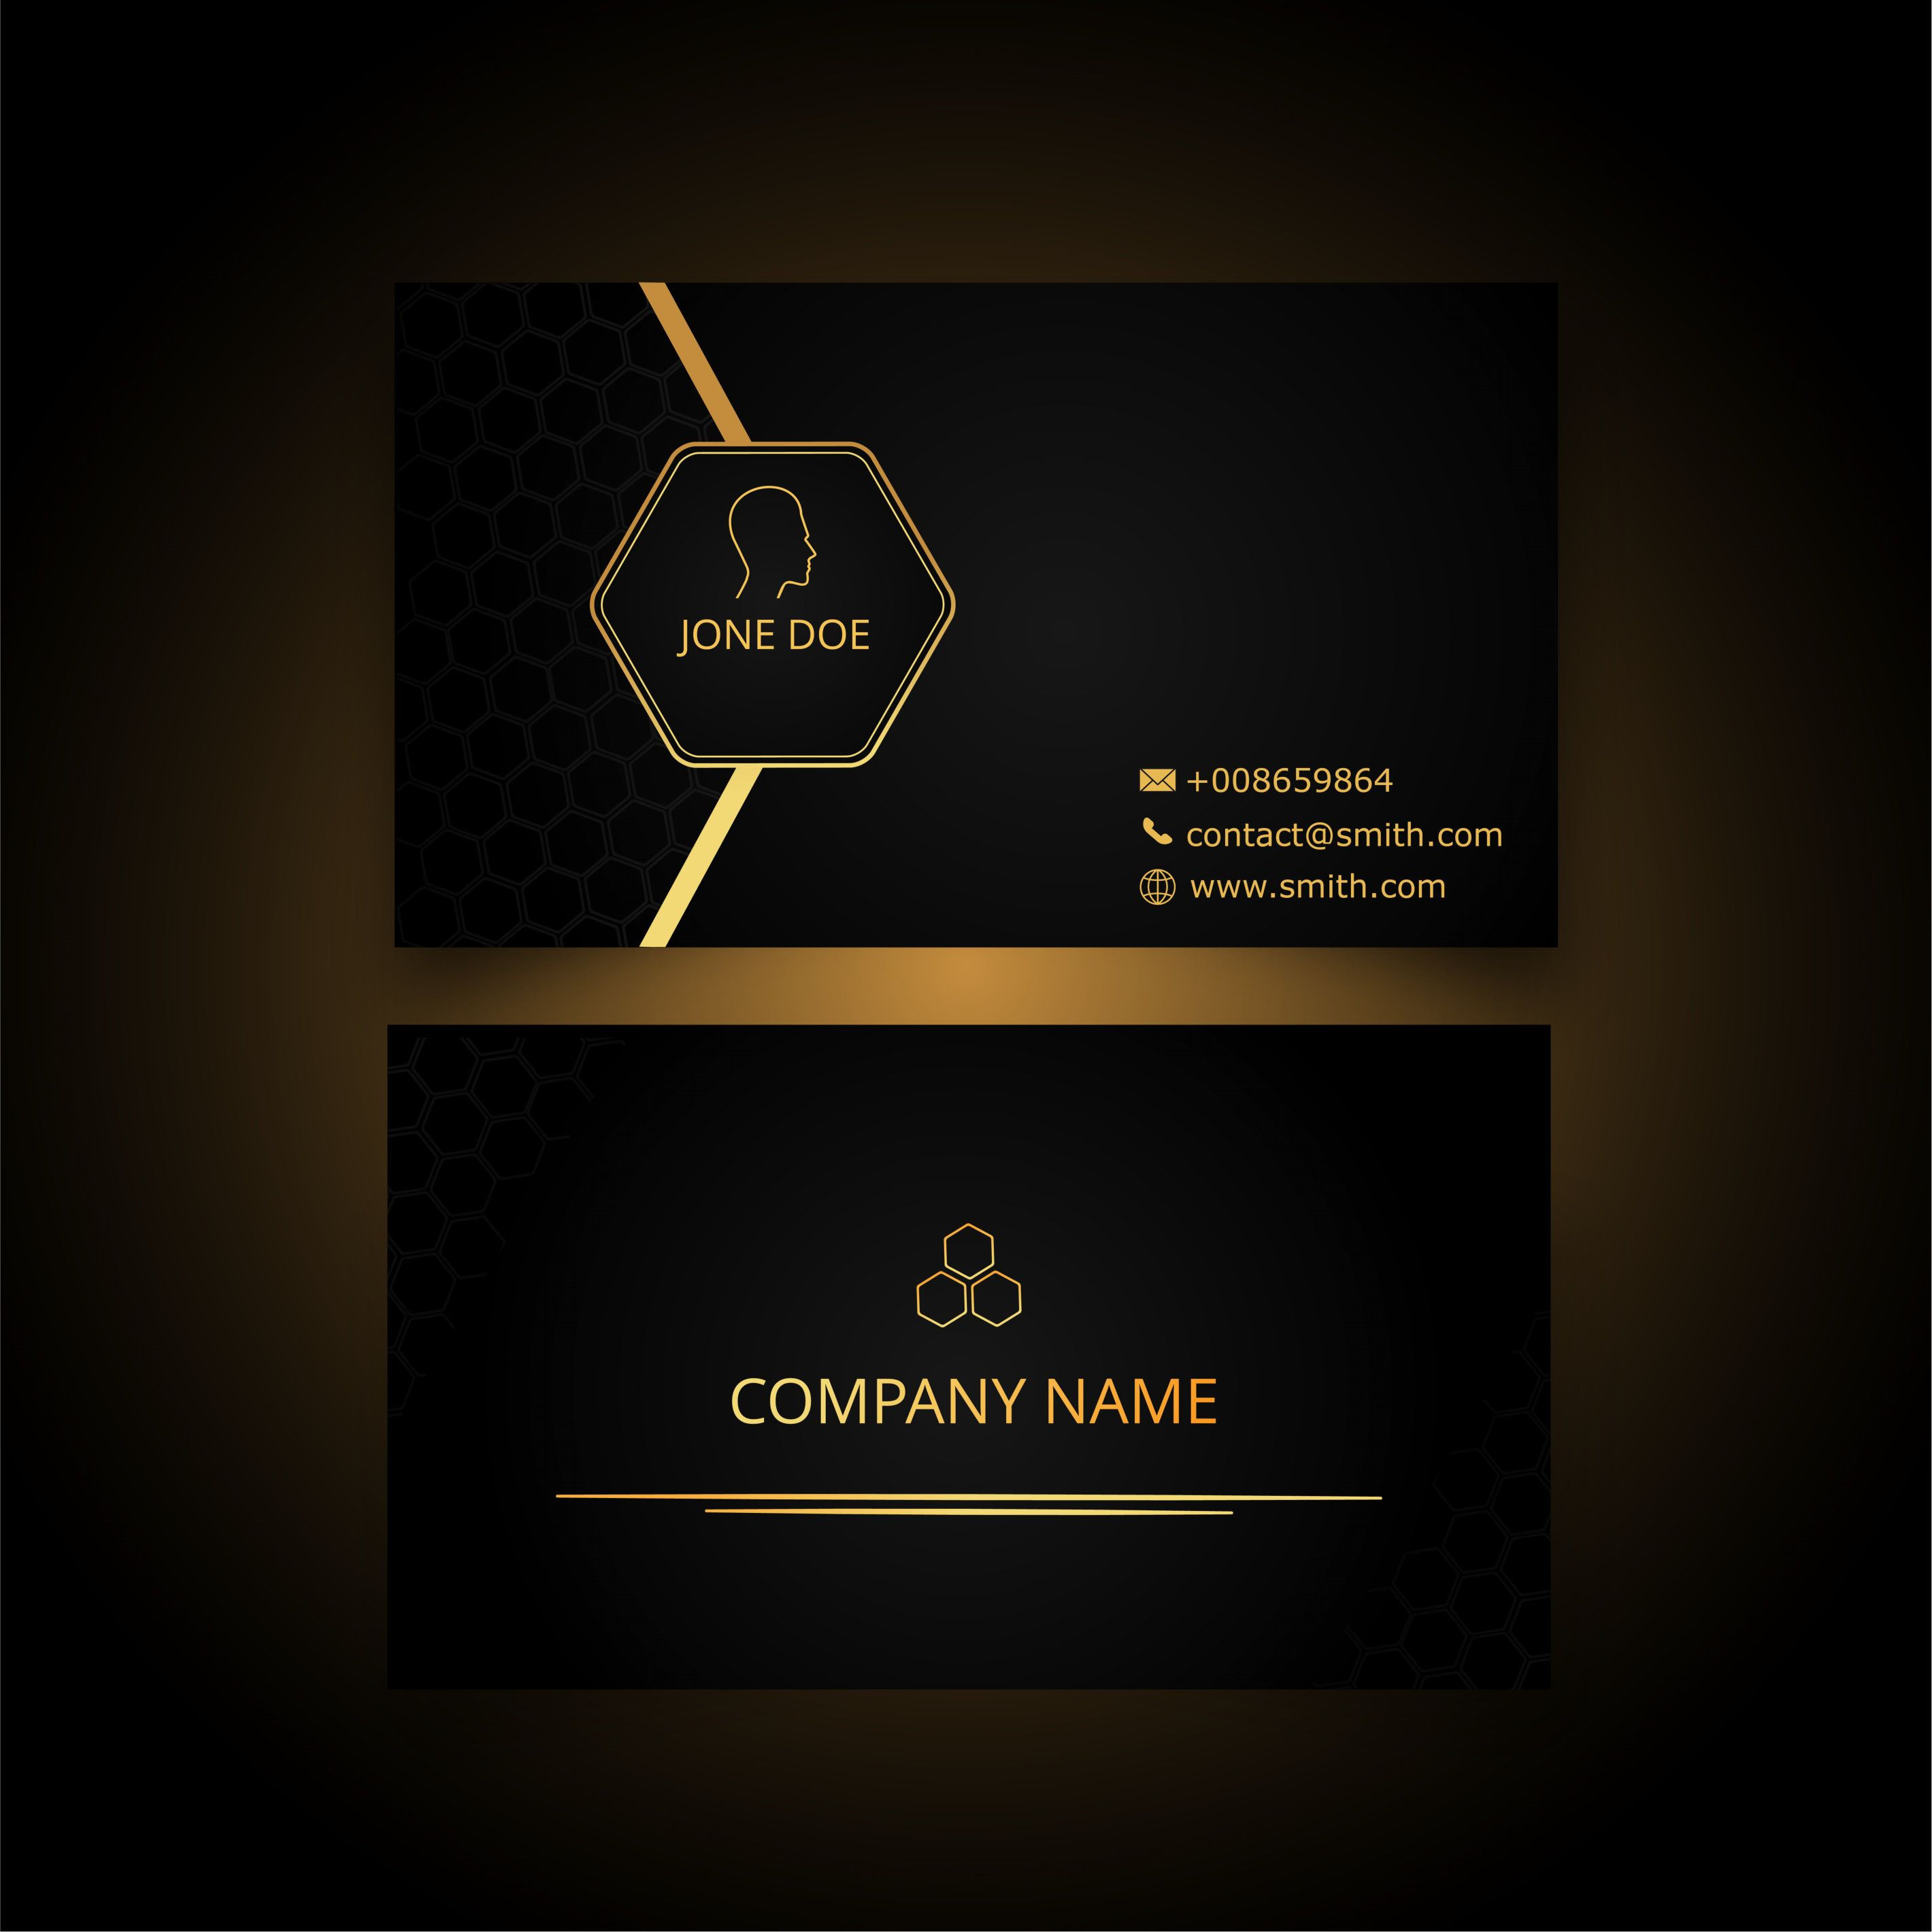 Modern Business Card Template Available On Freepik Of Salon Business Cards Templates Free